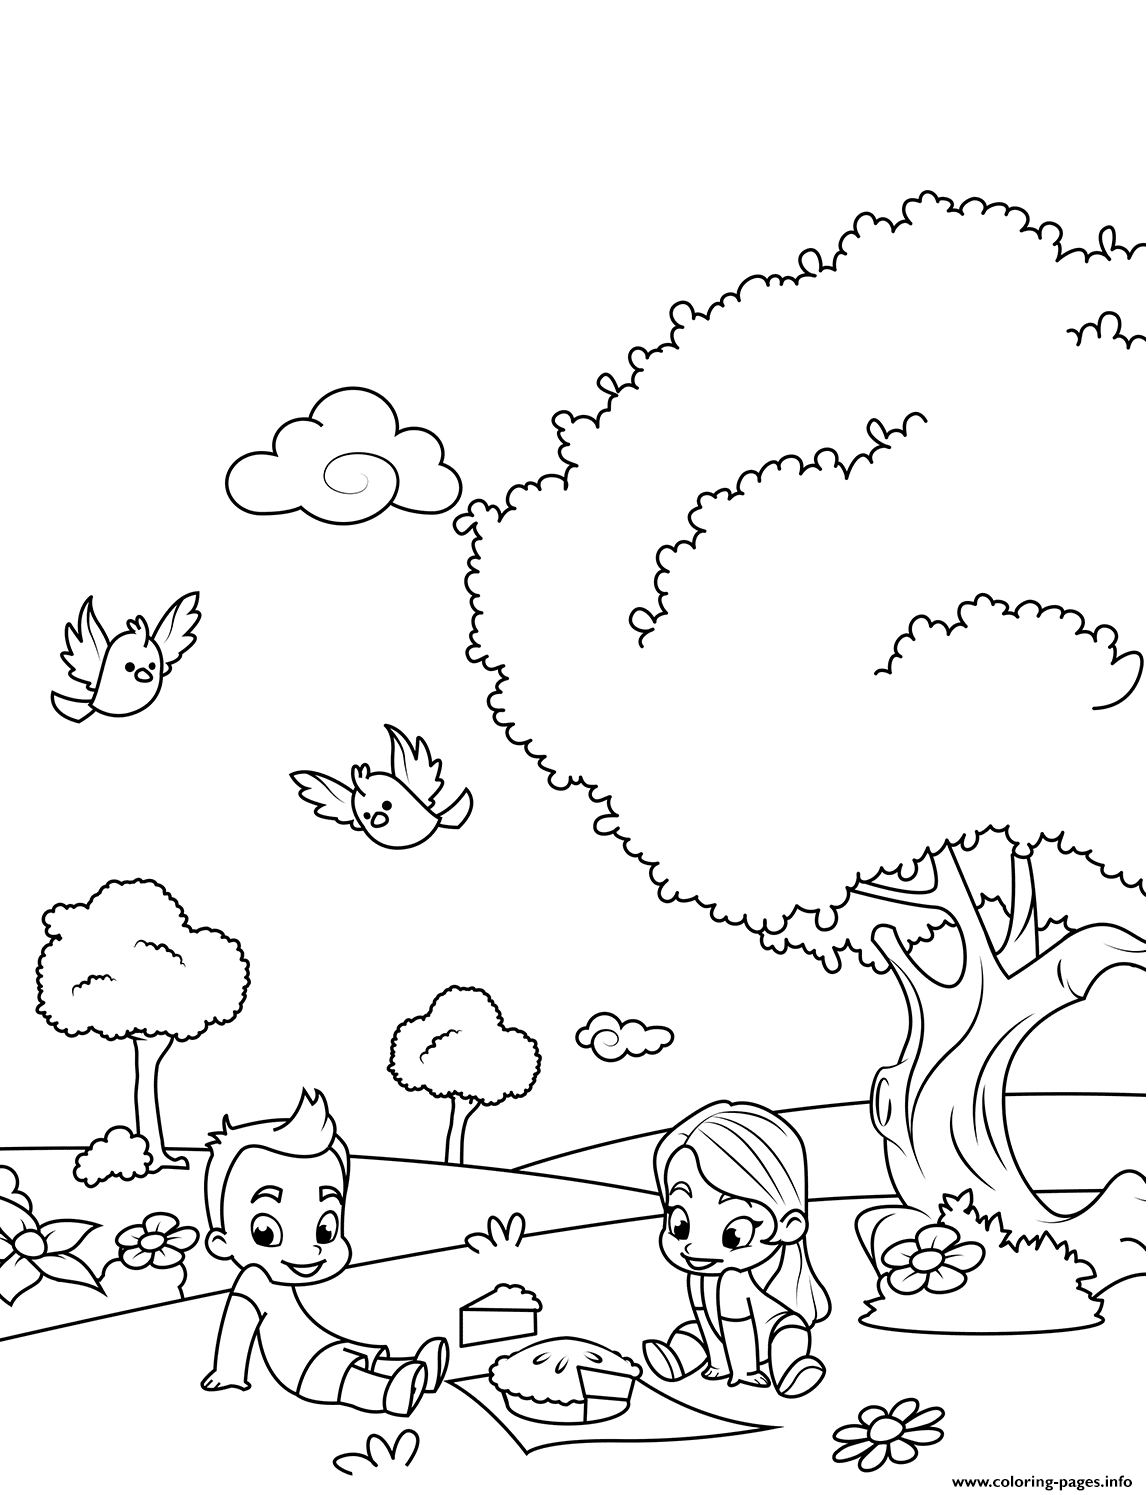 Boy And Girl On A Picnic Coloring Pages Printable